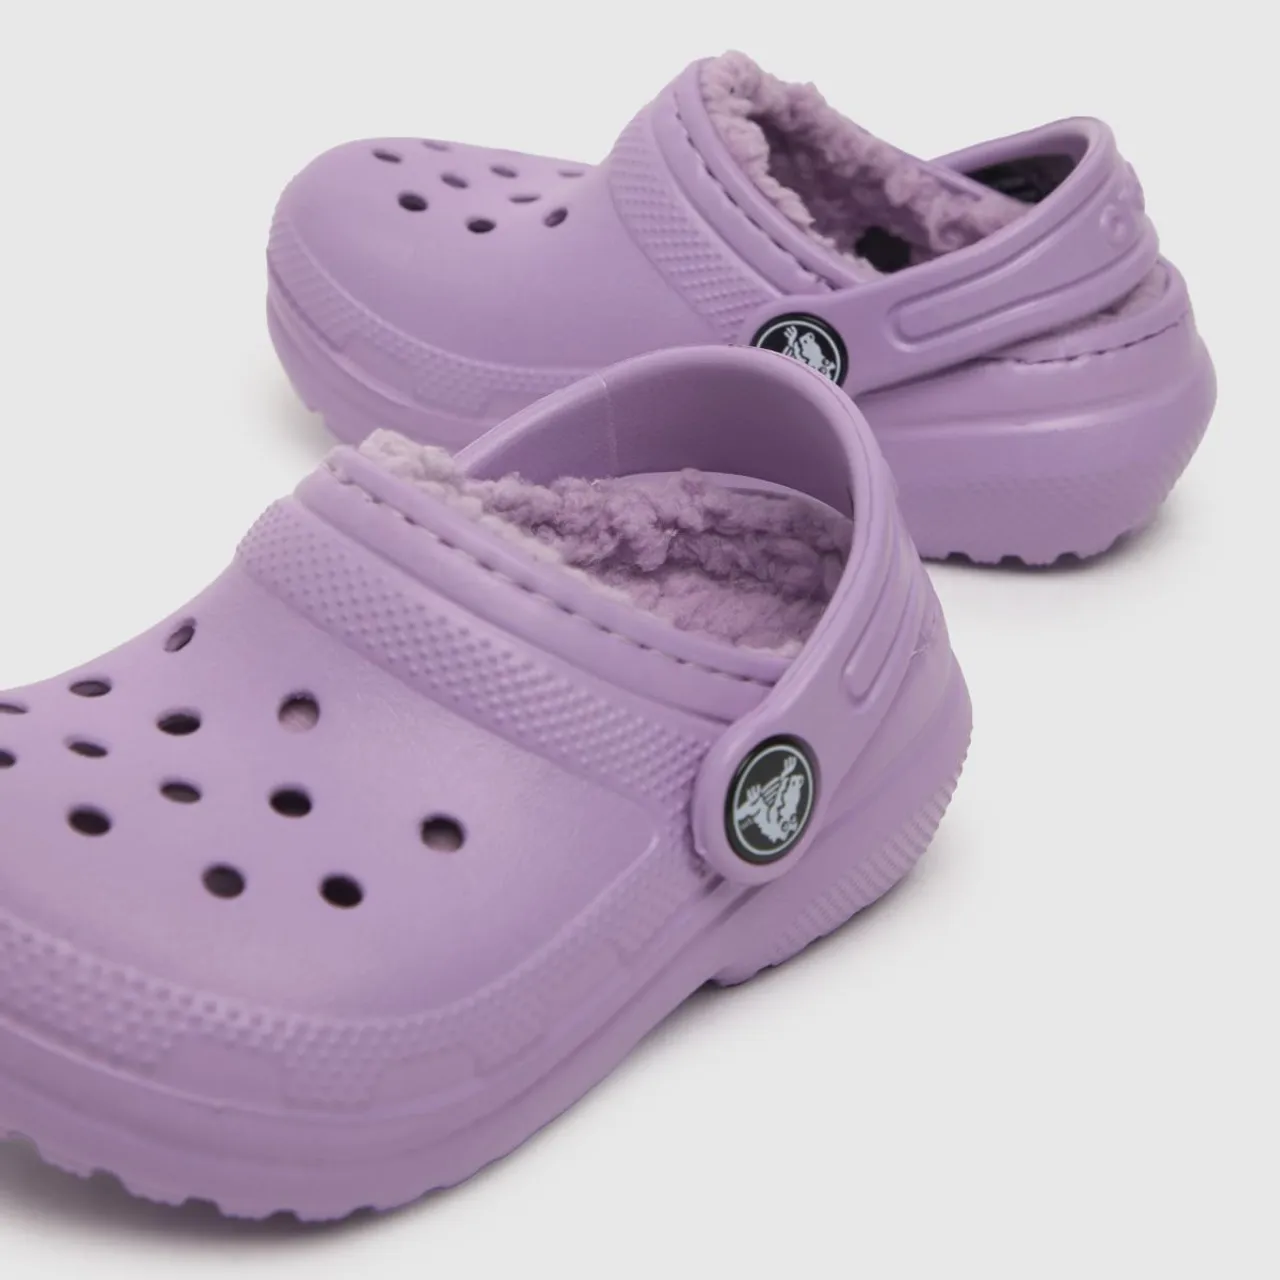 Crocs Lilac Classic Lined Clog Girls Toddler Sandals